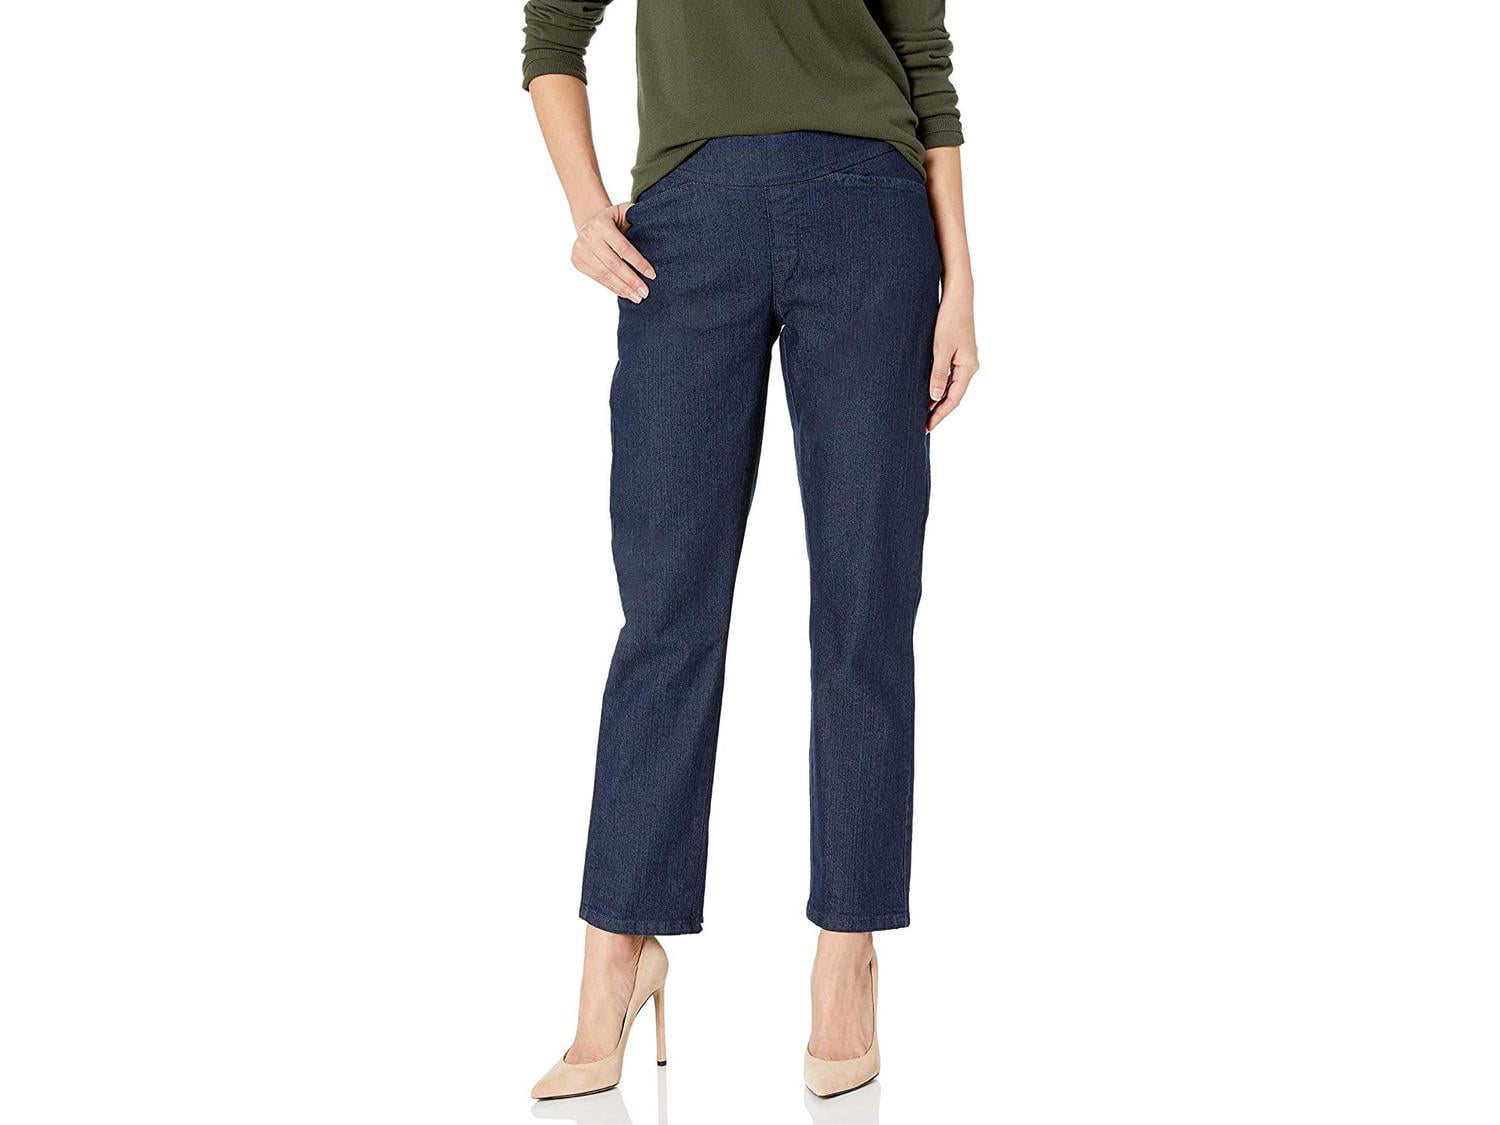 chic elastic waist pull on jeans